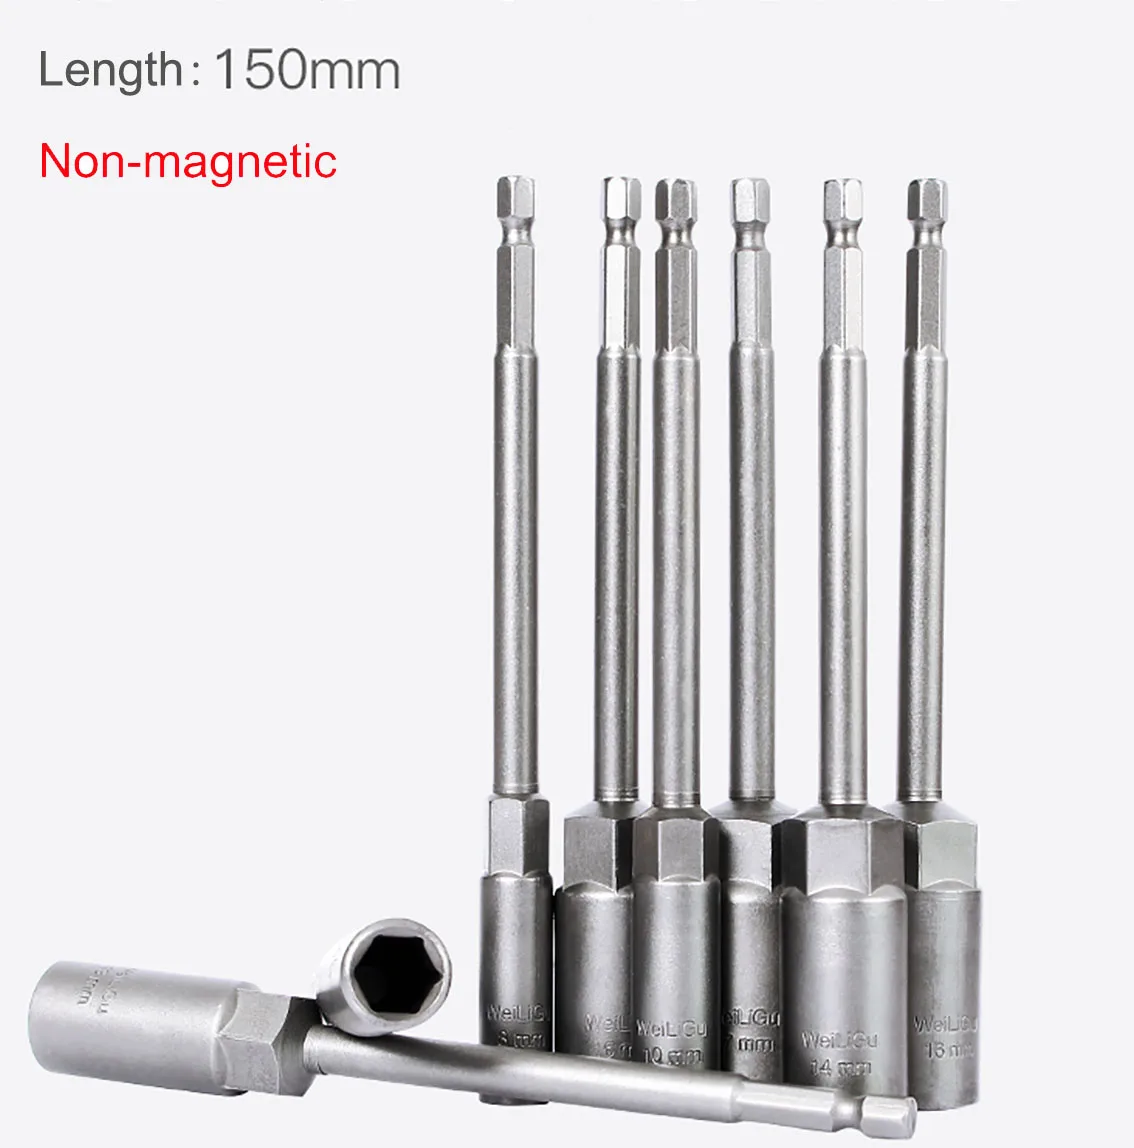 

1Pcs Length 150mm Non-magnetic Hex Socket Sleeve Bit Nut Driver for Power Drills Impact Drivers Hand Drills Tools Depth 30mm